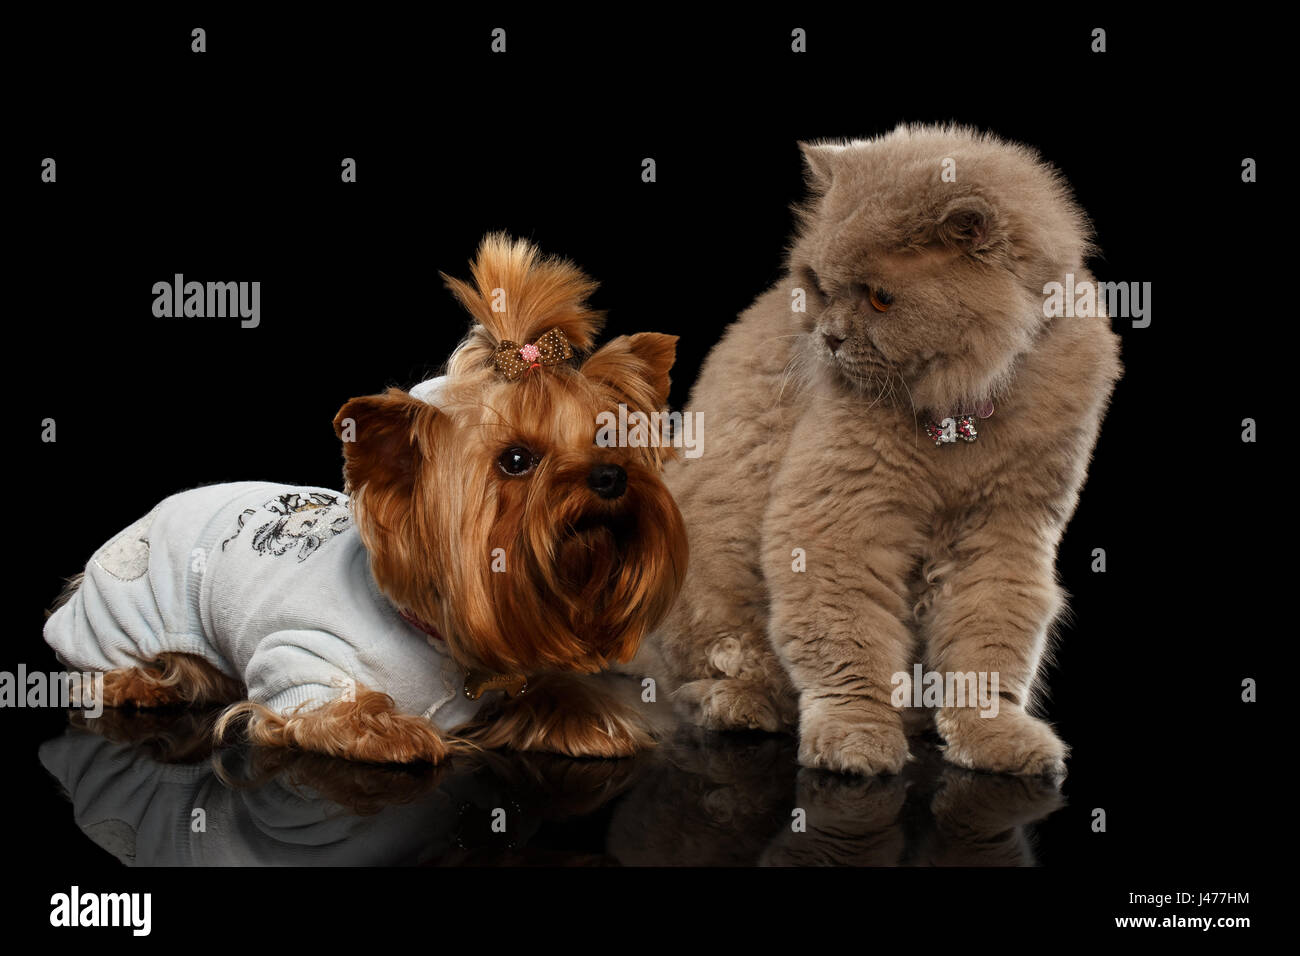 Scottish Cat and Yorkshire Terrier Dog Isolated Stock Photo